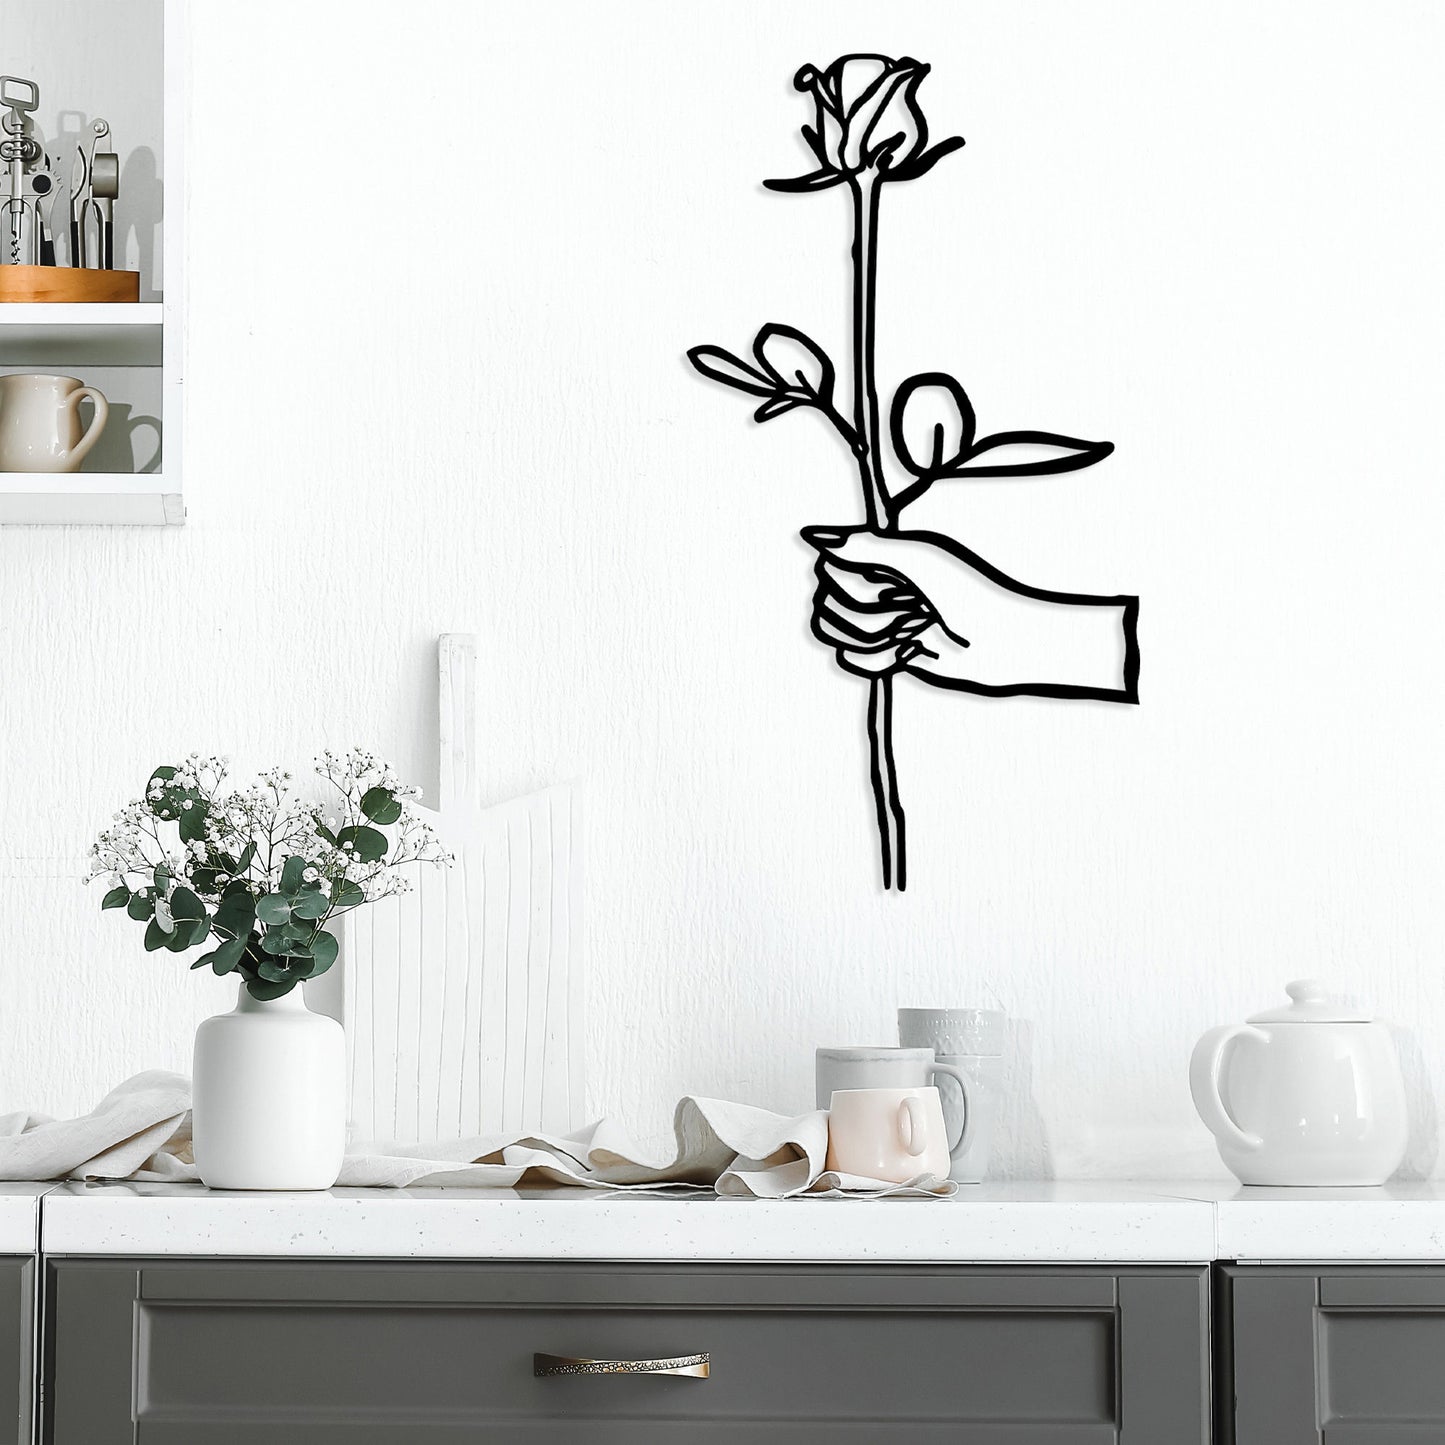 Rose in Hand - Decorative Metal Wall Accessory